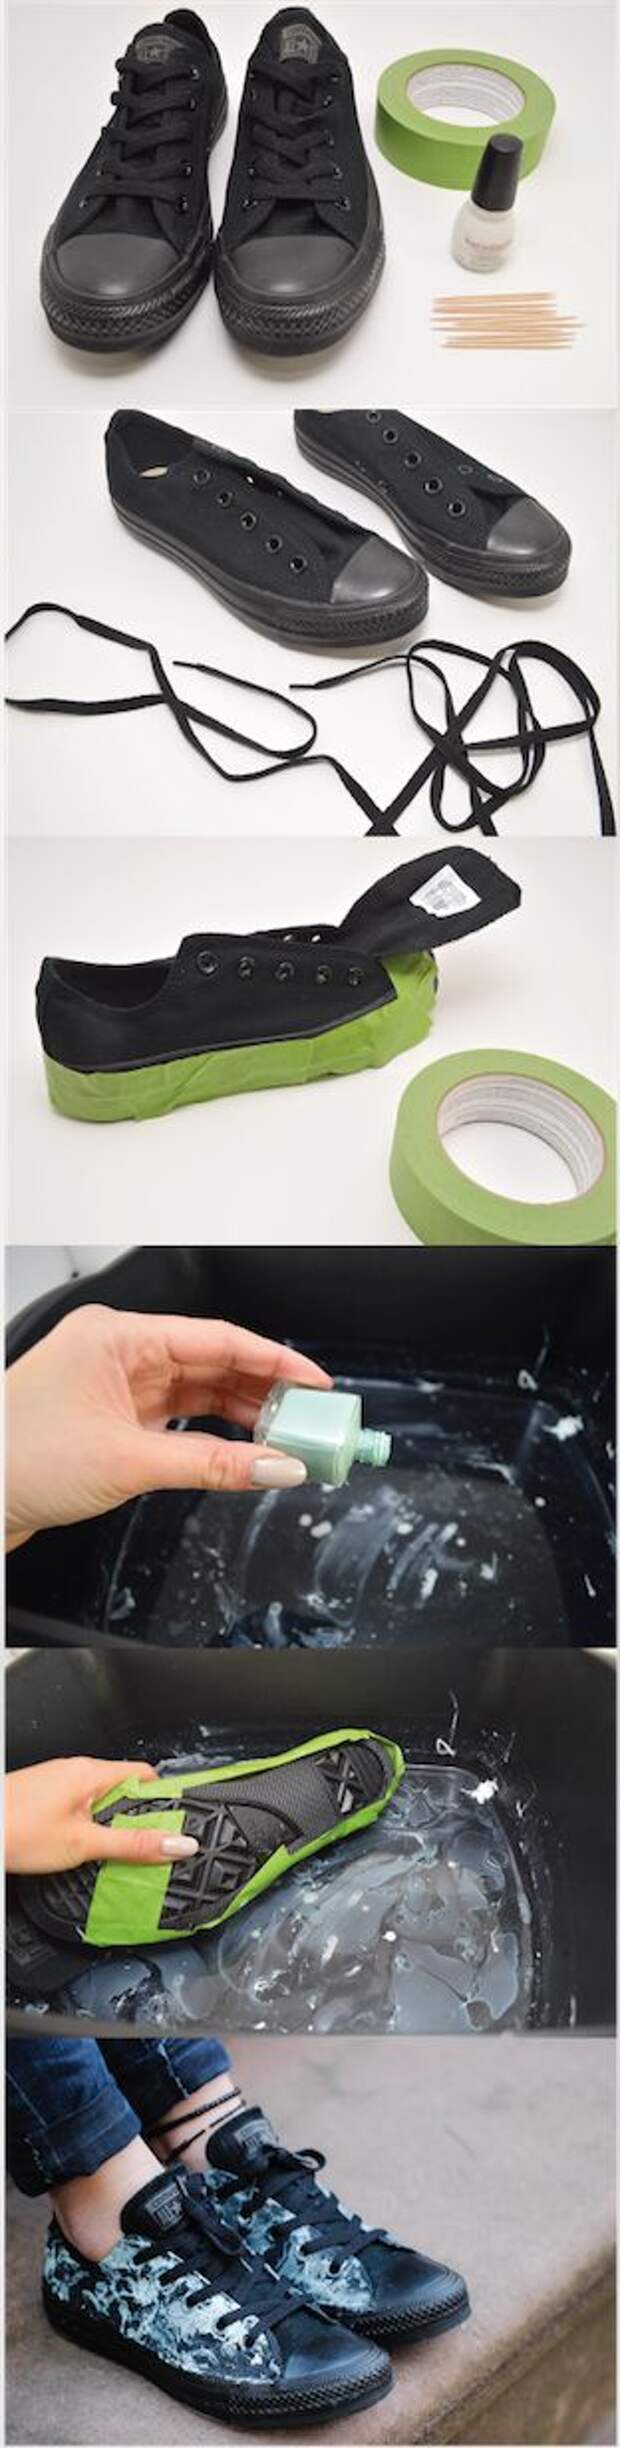 Blogger Kirsten Nunez demonstrates how to repurpose the marbling nail trend and apply the technique on Chucks in this easy DIY #chuckhack post: http://www.studs-and-pearls.com/2014/12/diy-marbled-low-tops.html #converse #diy: 